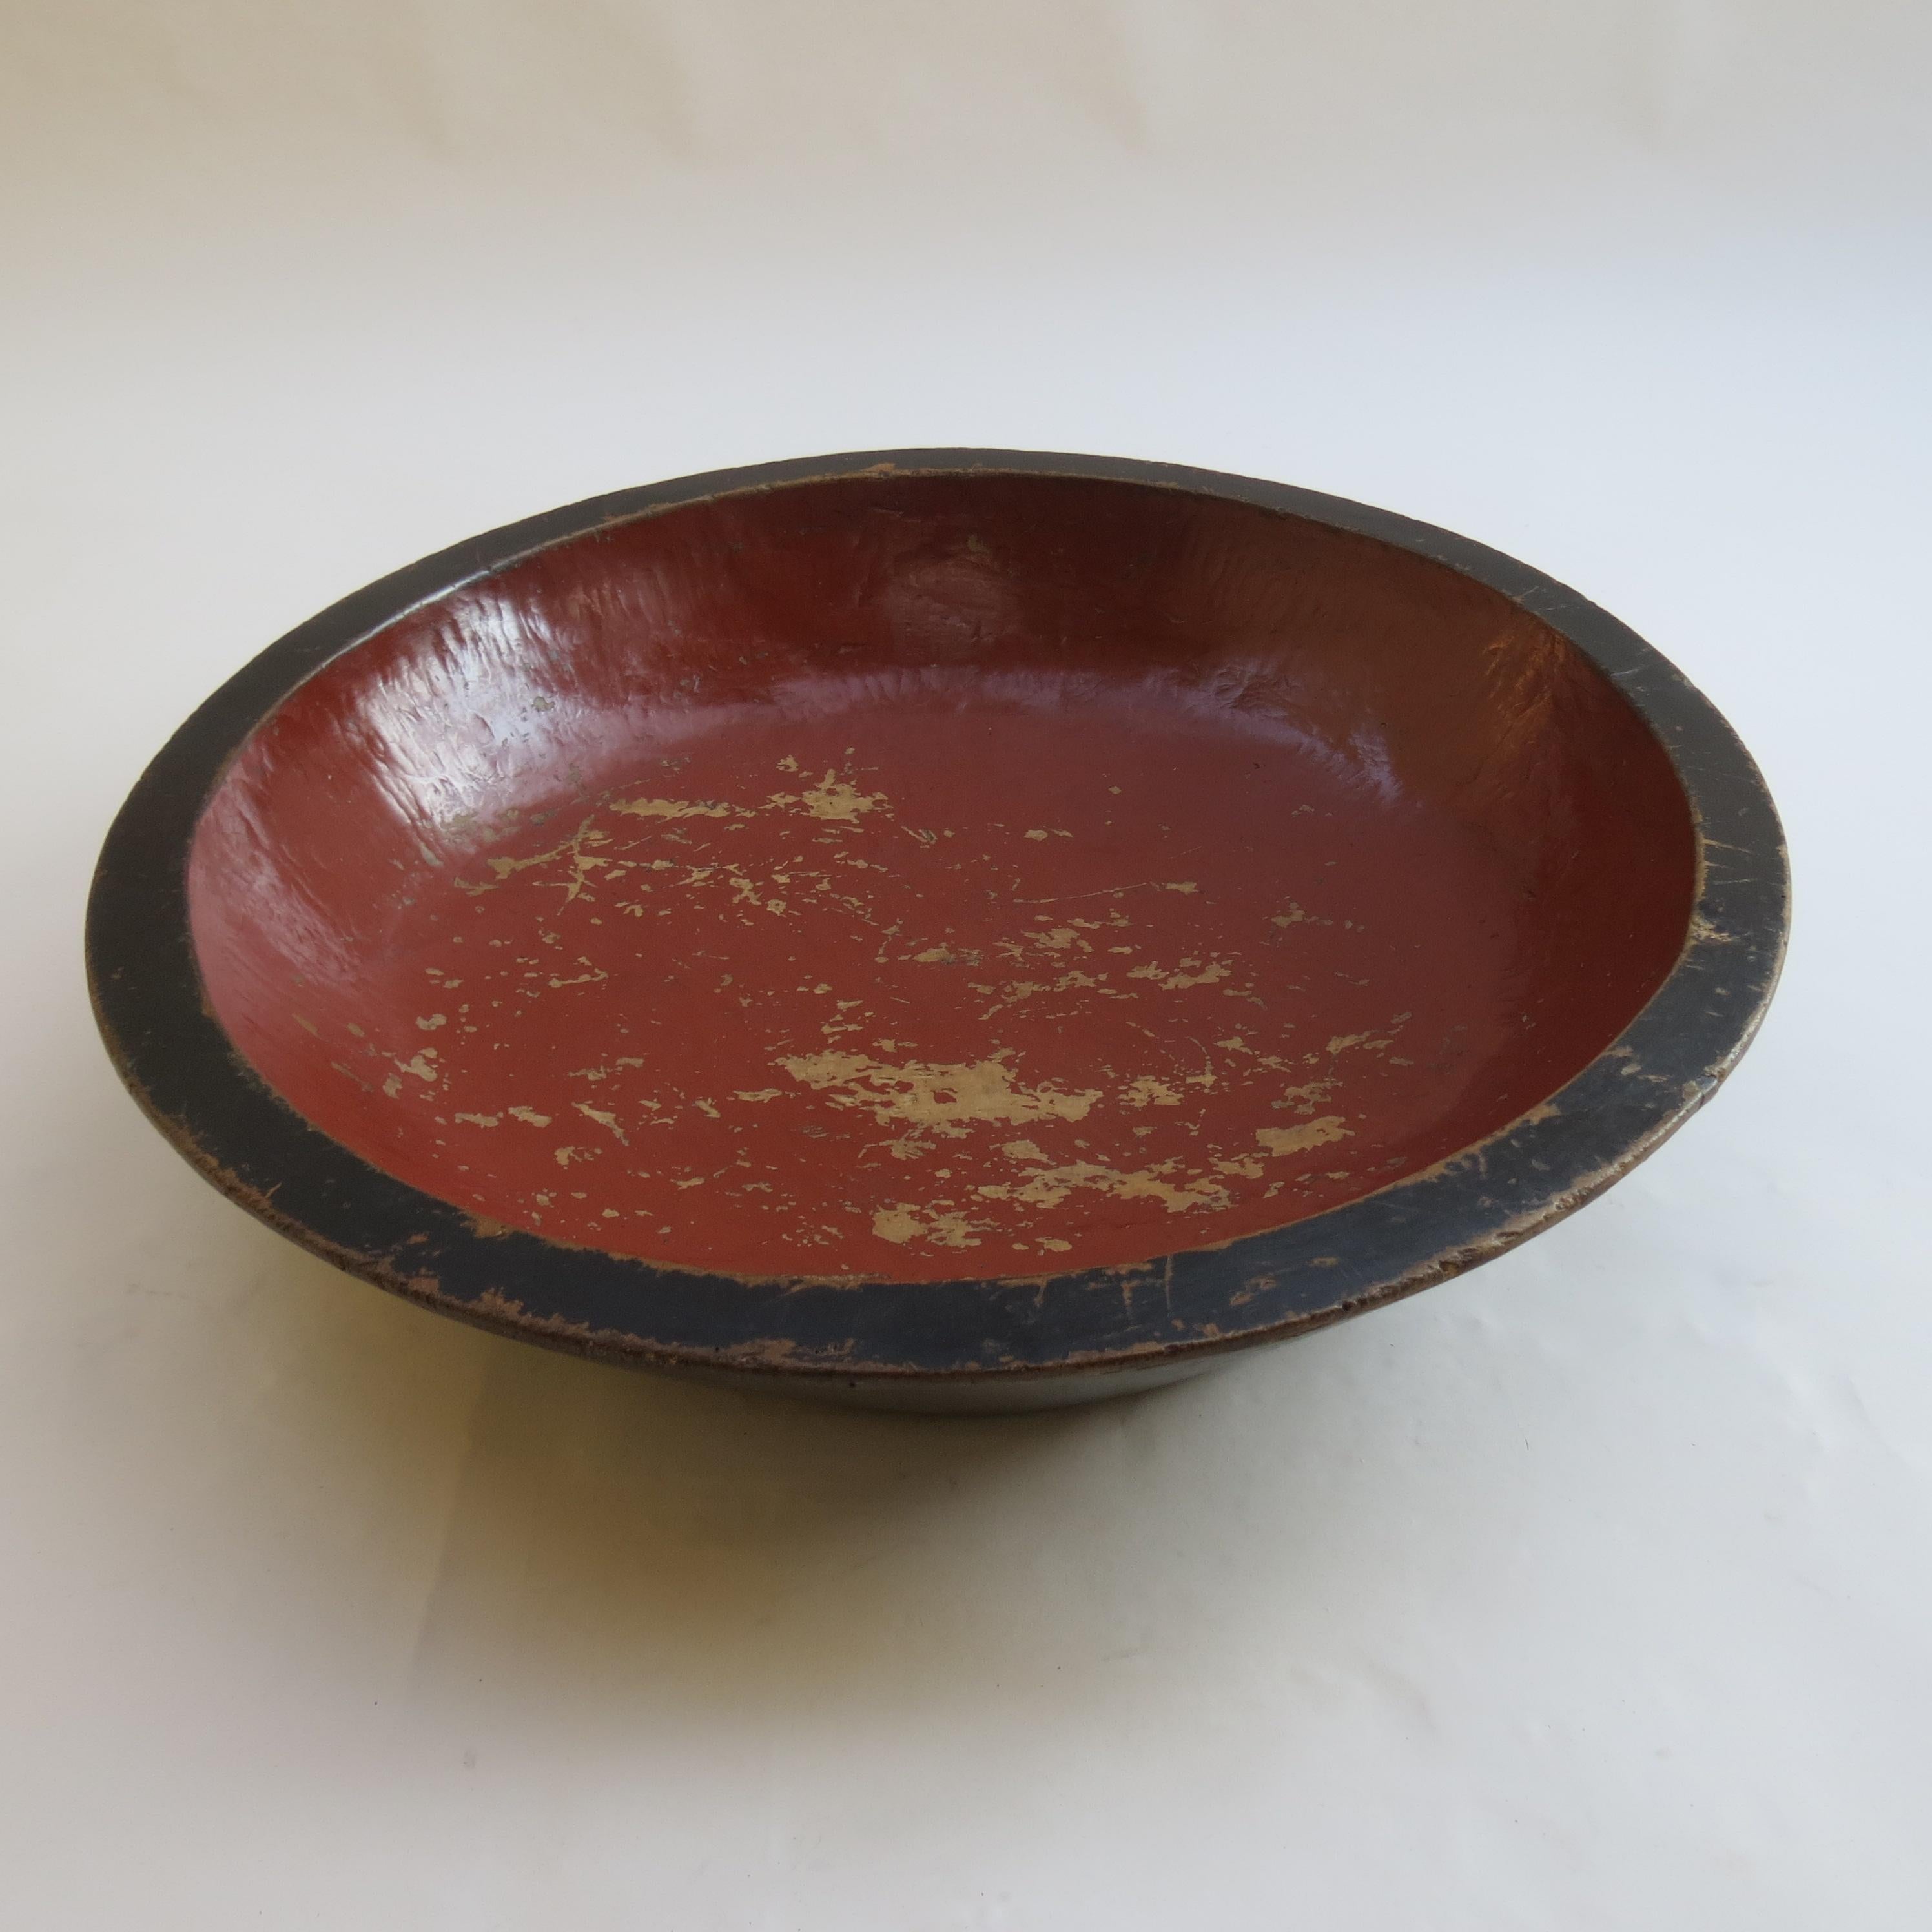 Very large vintage bowl originally from Japan. Hand produced in fruitwood, it has black lacquer to the outside and red lacquer to the inside. The finish is patinated and distressed giving a wonderful worn effect. The bowl dates from early 20th